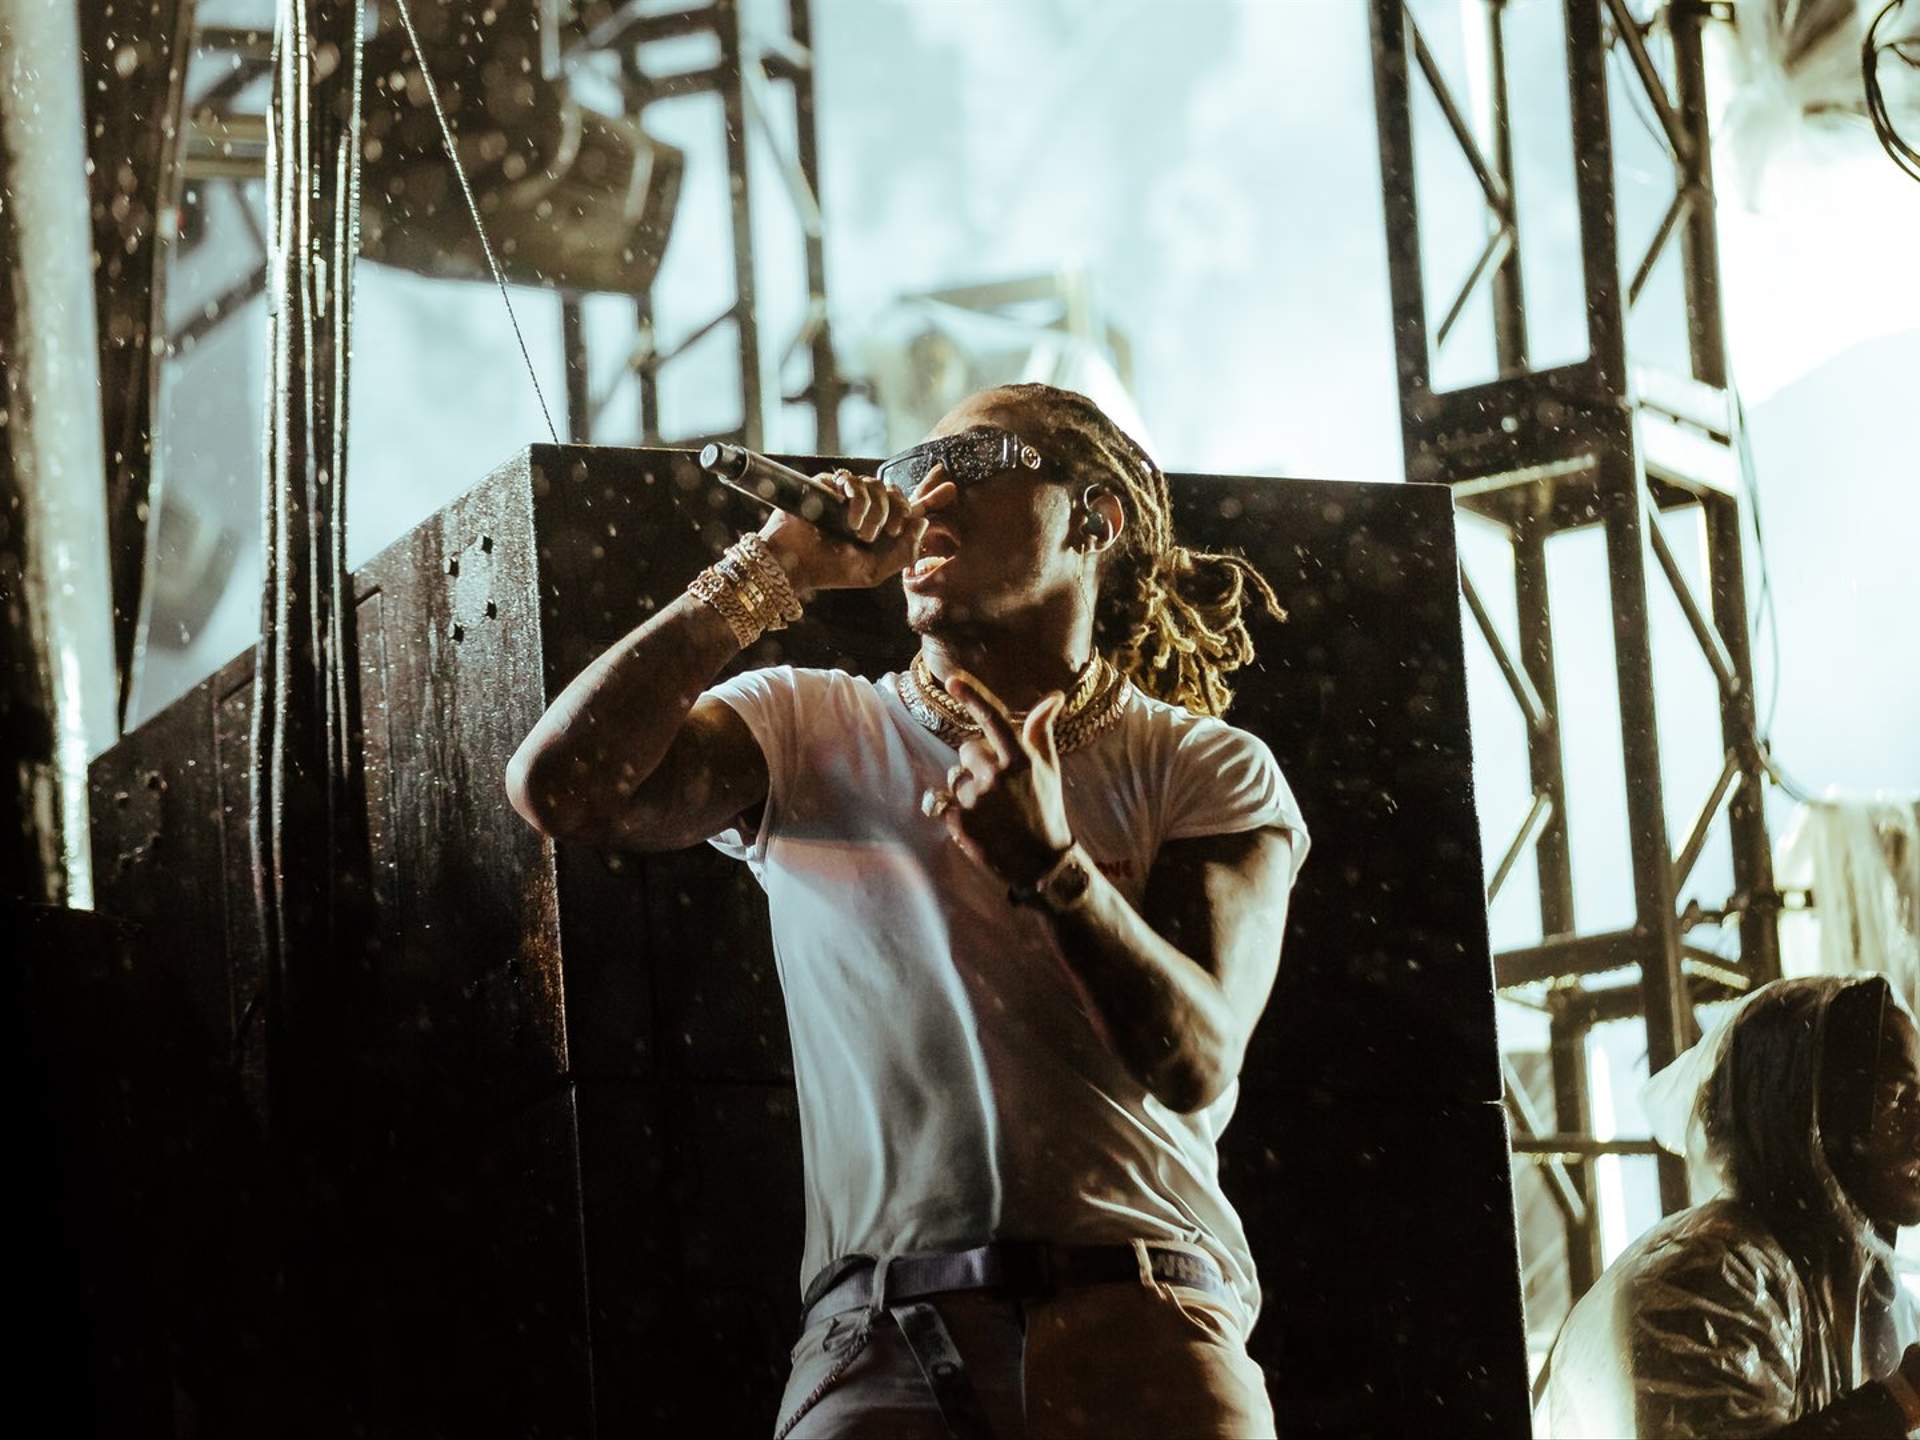 Future To Headline Huge Hip Hop Festival Rolling Loud's First Ever